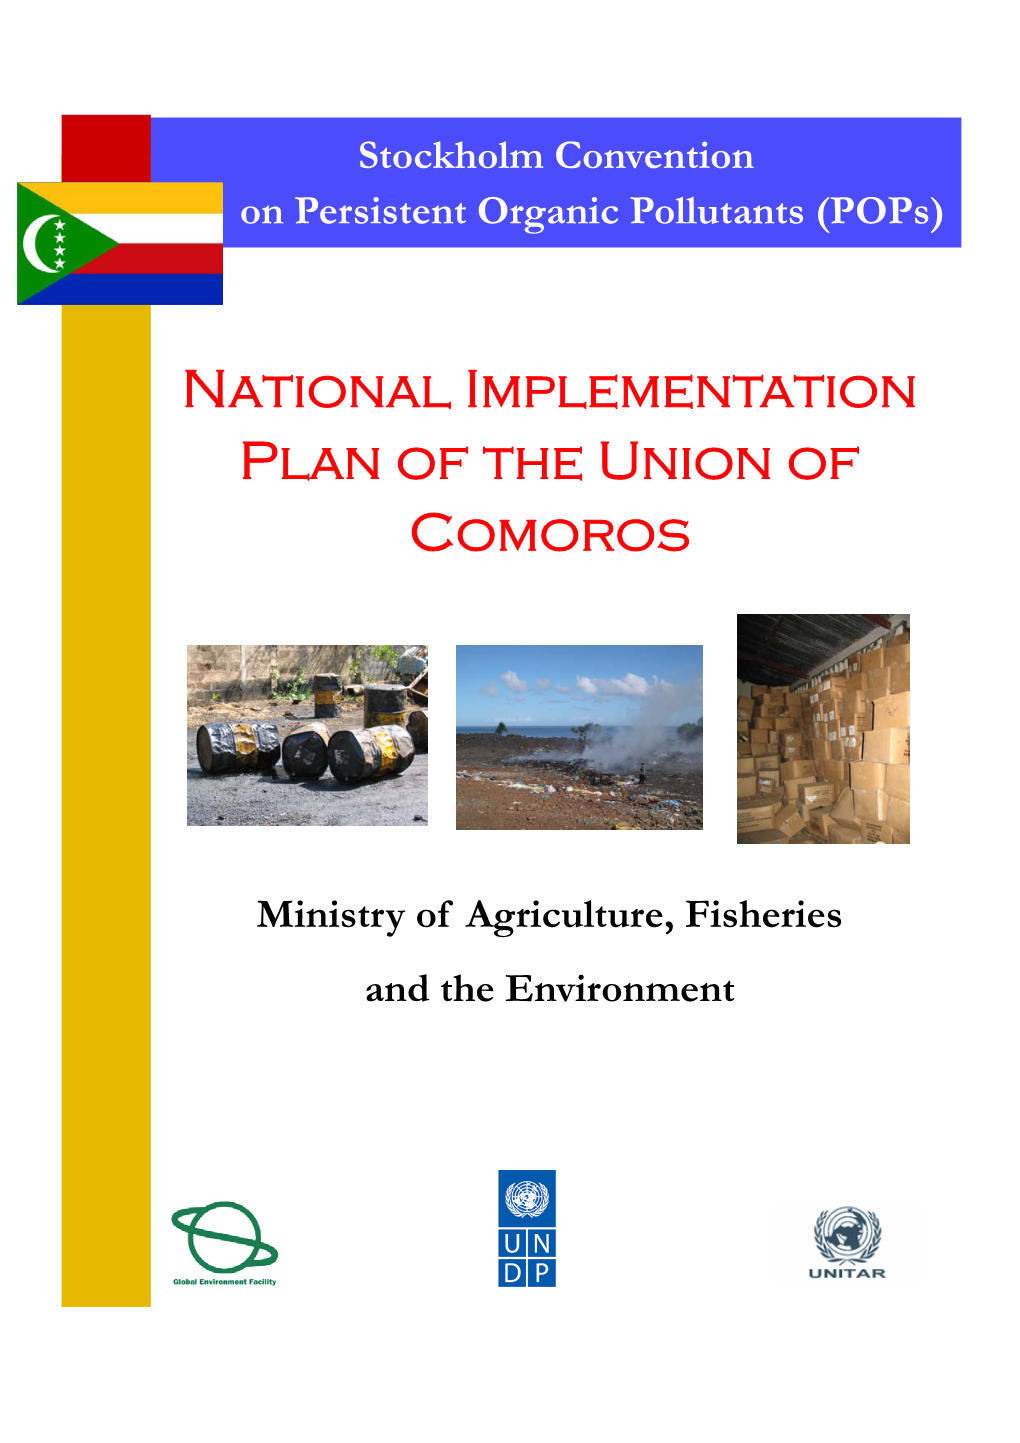 National Implementation Plan of the Union of Comoros